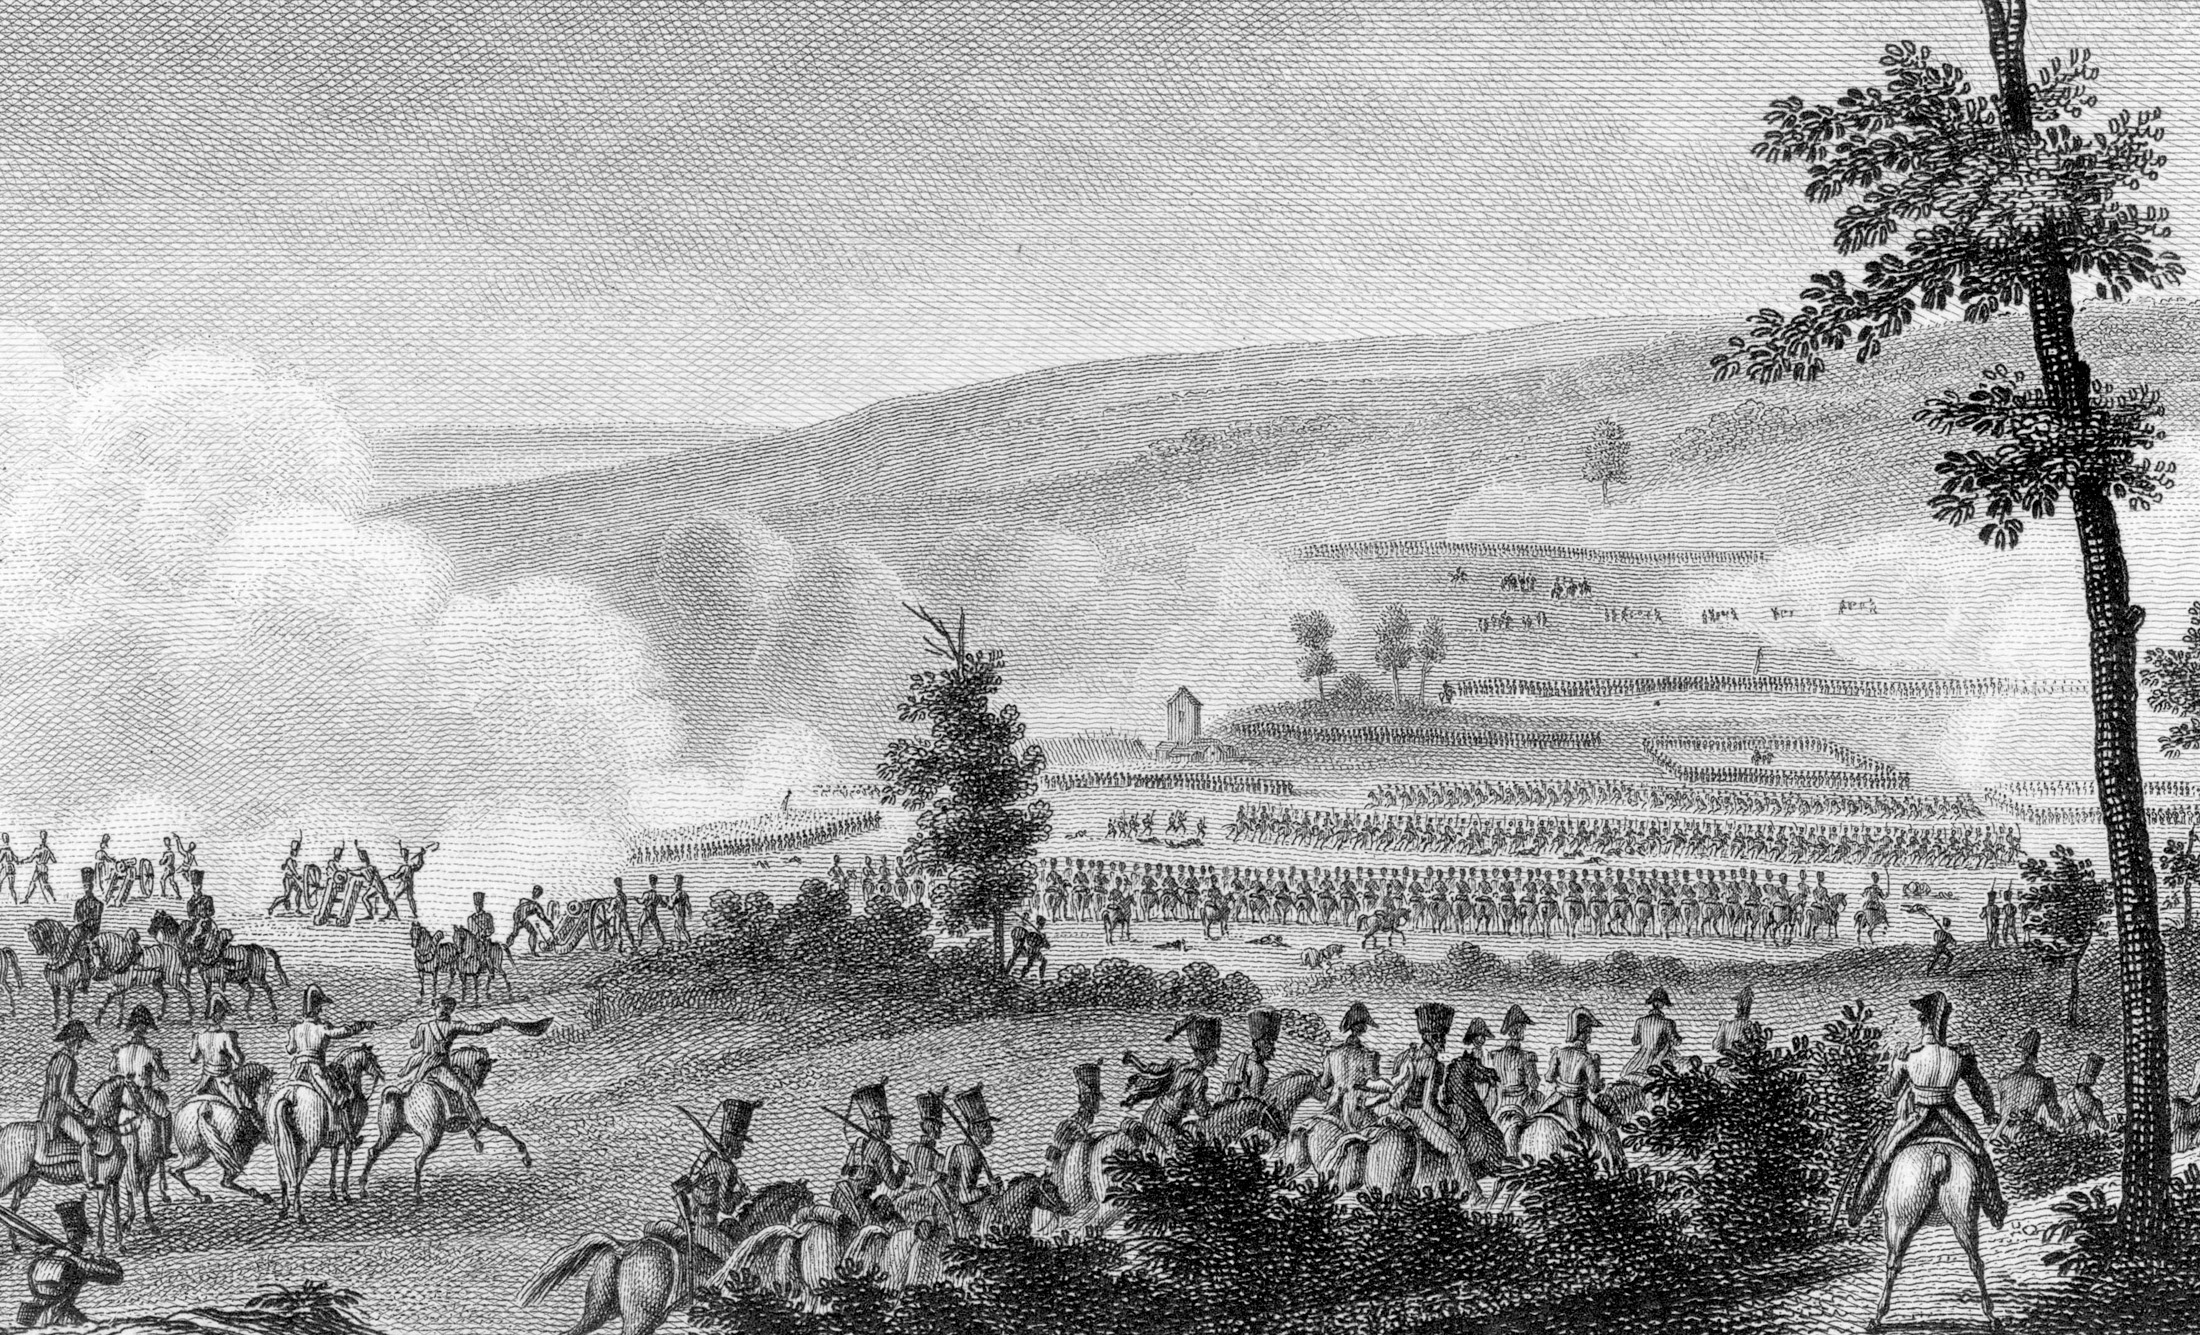 Moving out from their cover in the treeline, Napoleon’s cavalry prepares itself for engagement with Wrede’s Austro-Bavarian infantry.